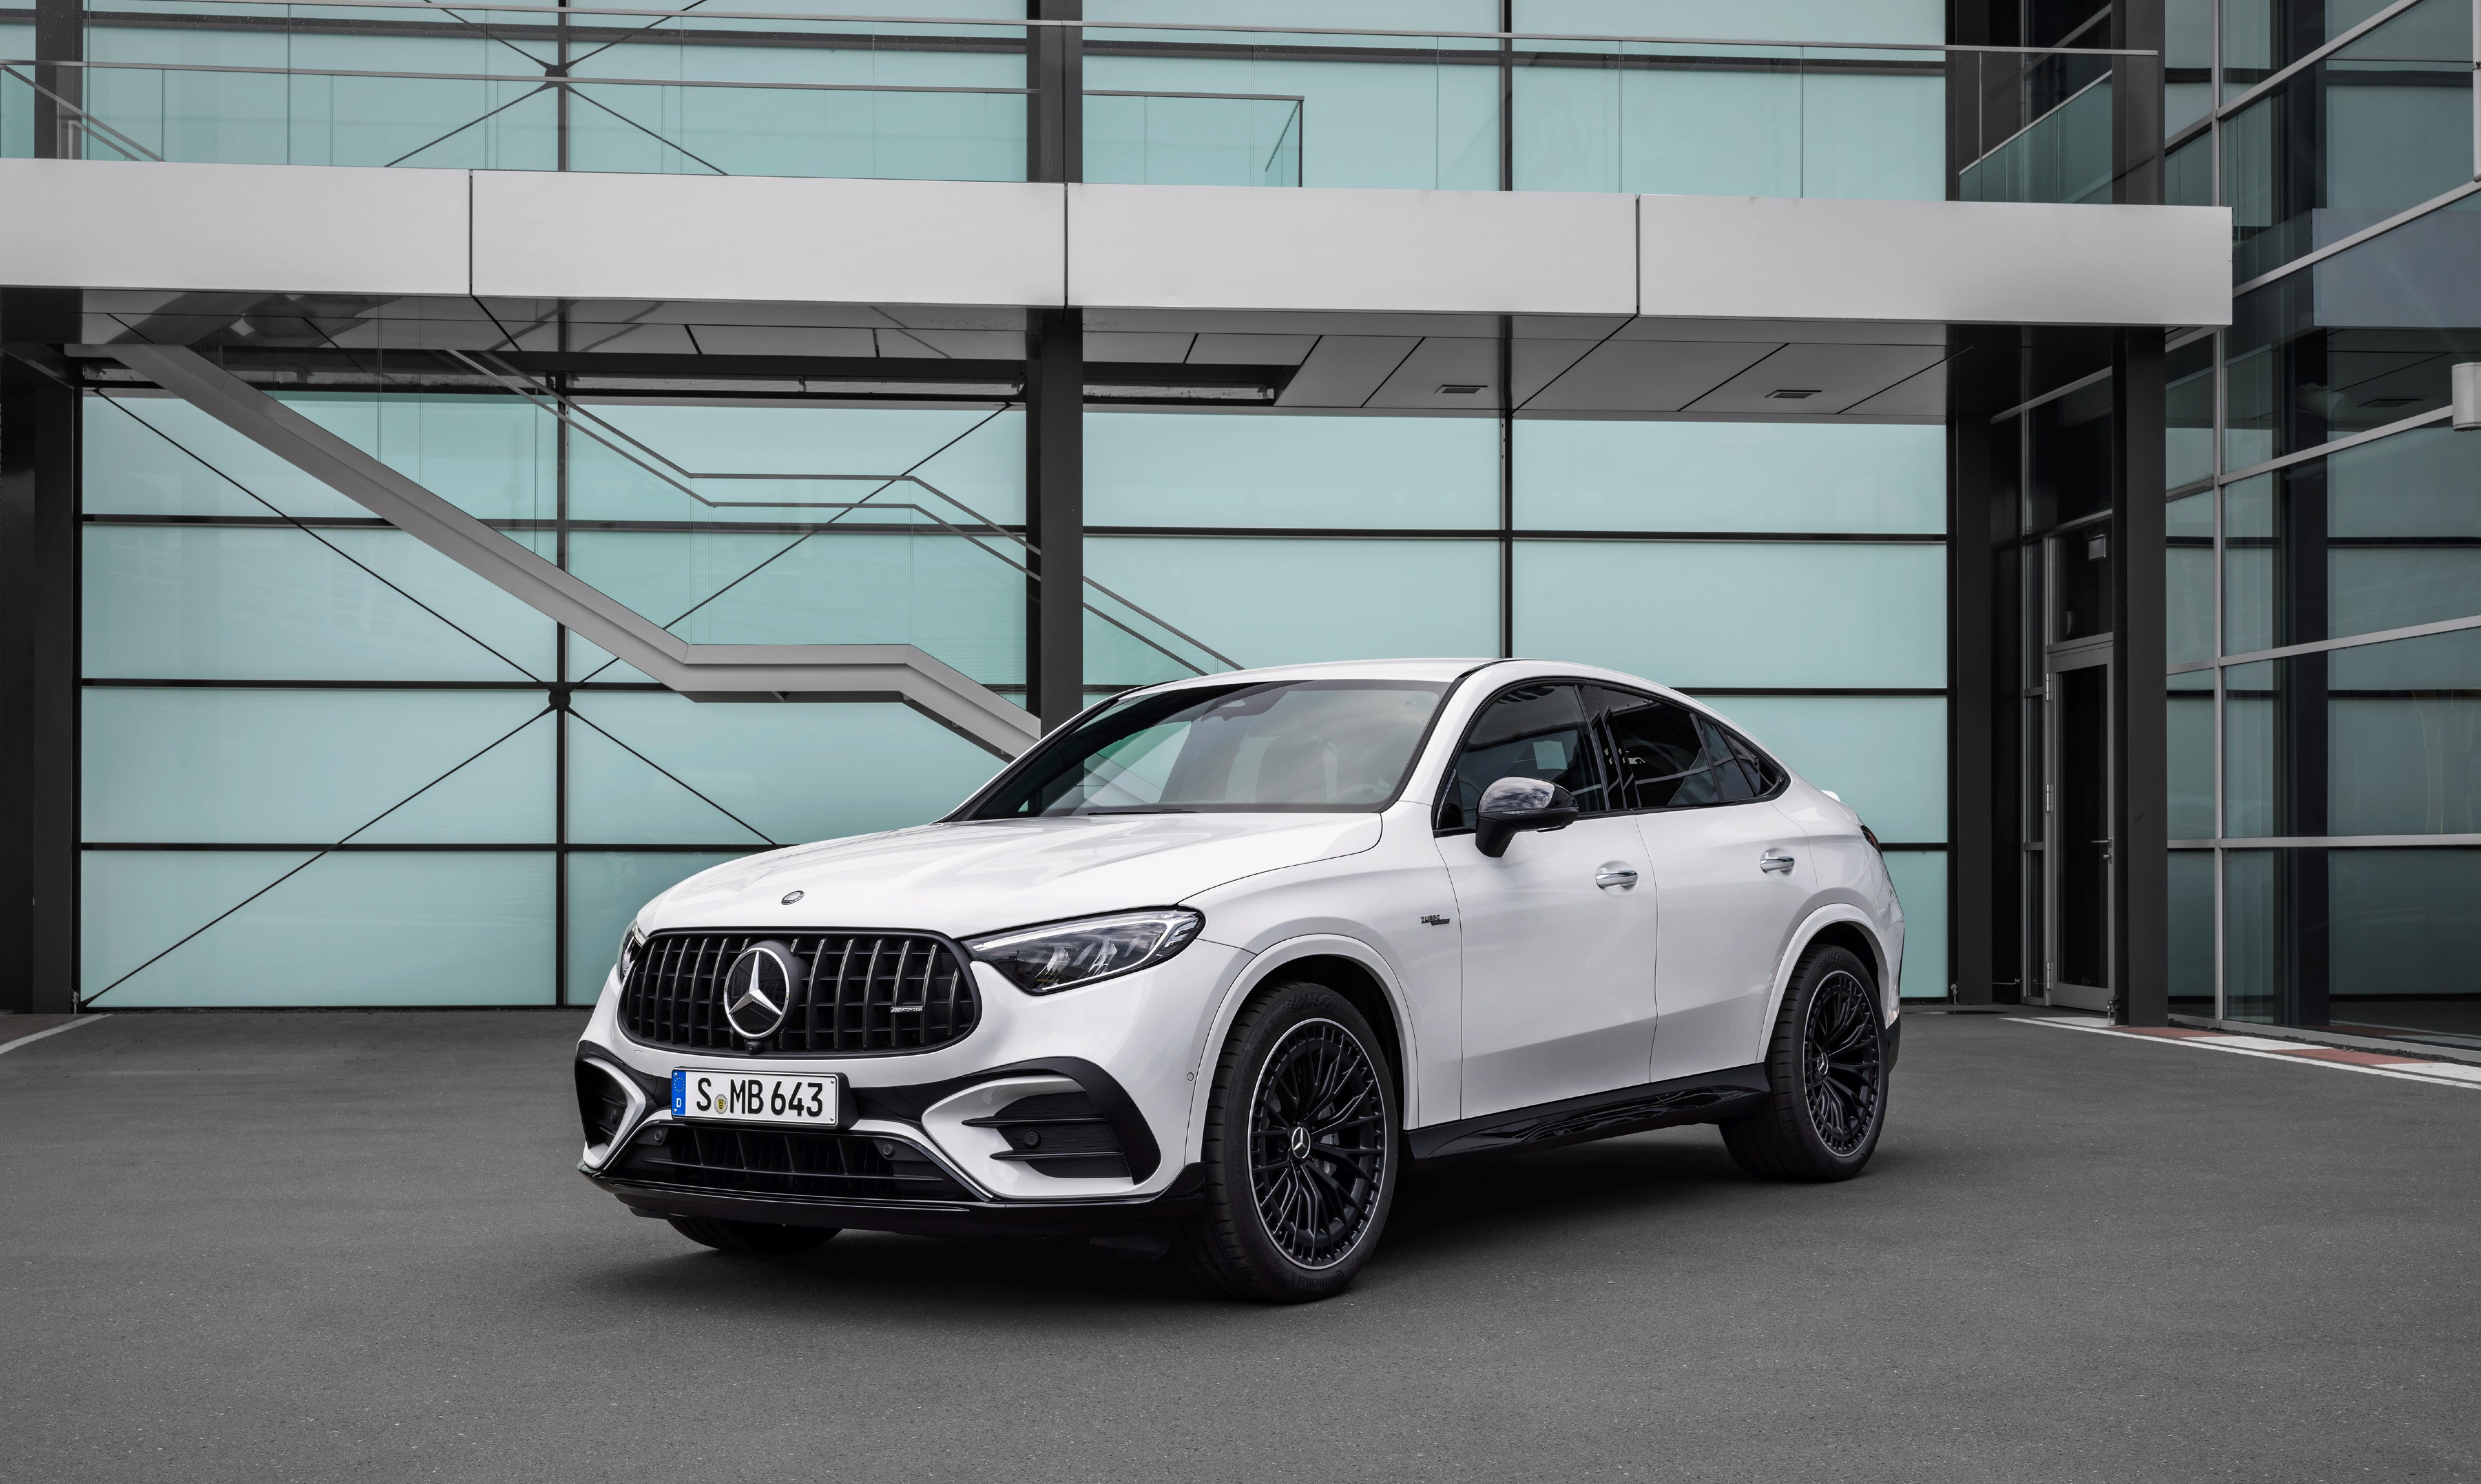 The Mercedes-AMG GLC 63 S E Performance packs 671 bhp and 1,020 Nm from its hybrid engine and has an electric driving range of 12 km